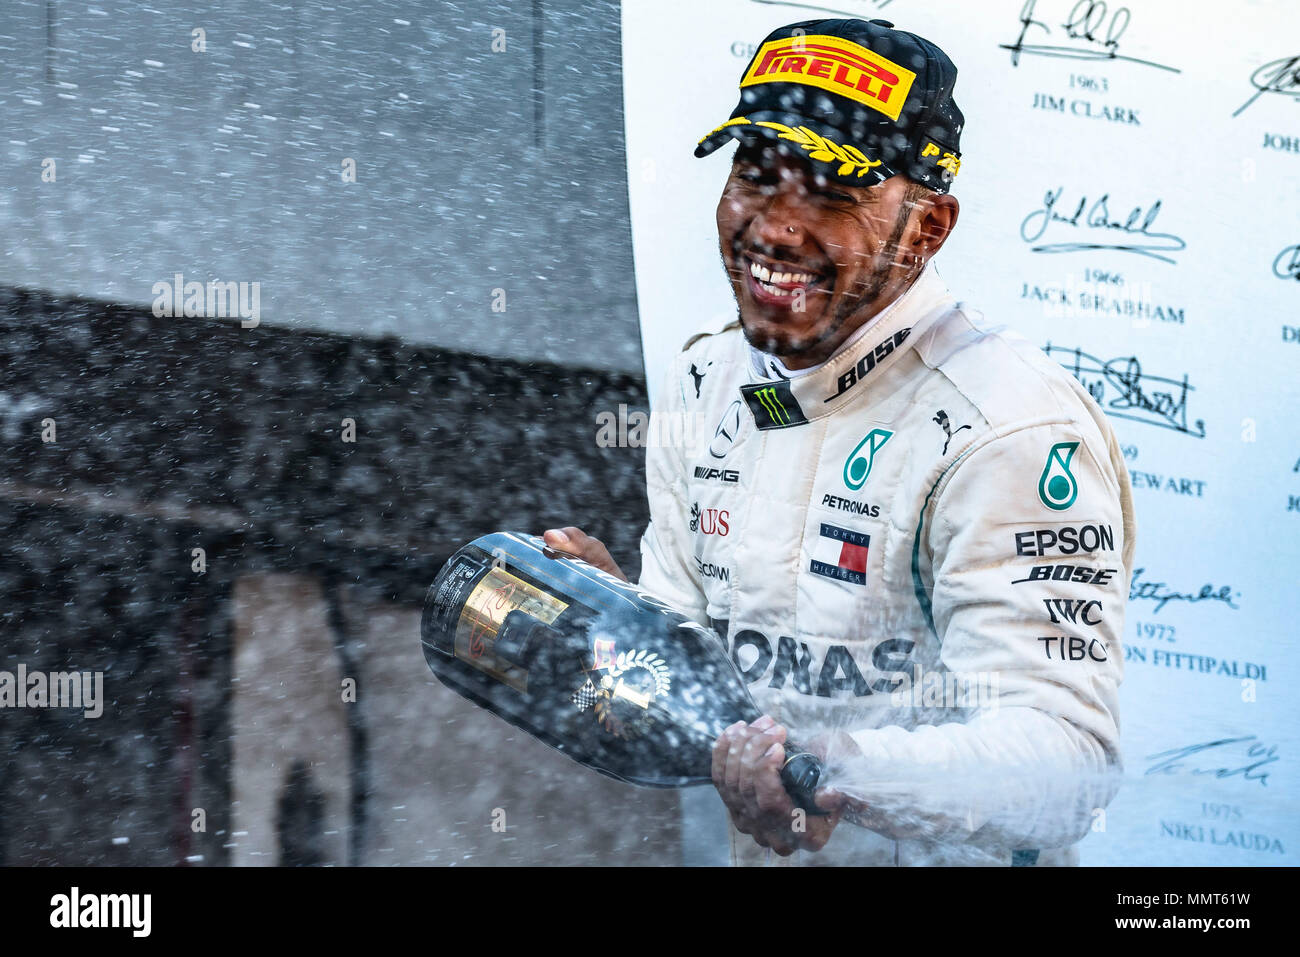 Barcelona, Spain. 13 May, 2018:  LEWIS HAMILTON (GBR) of Mercedes sprays with champagne as he celebrates his victory of the Spanish GP holding his cup on the podium at the Circuit de Barcelona - Catalunya Credit: Matthias Oesterle/Alamy Live News Stock Photo